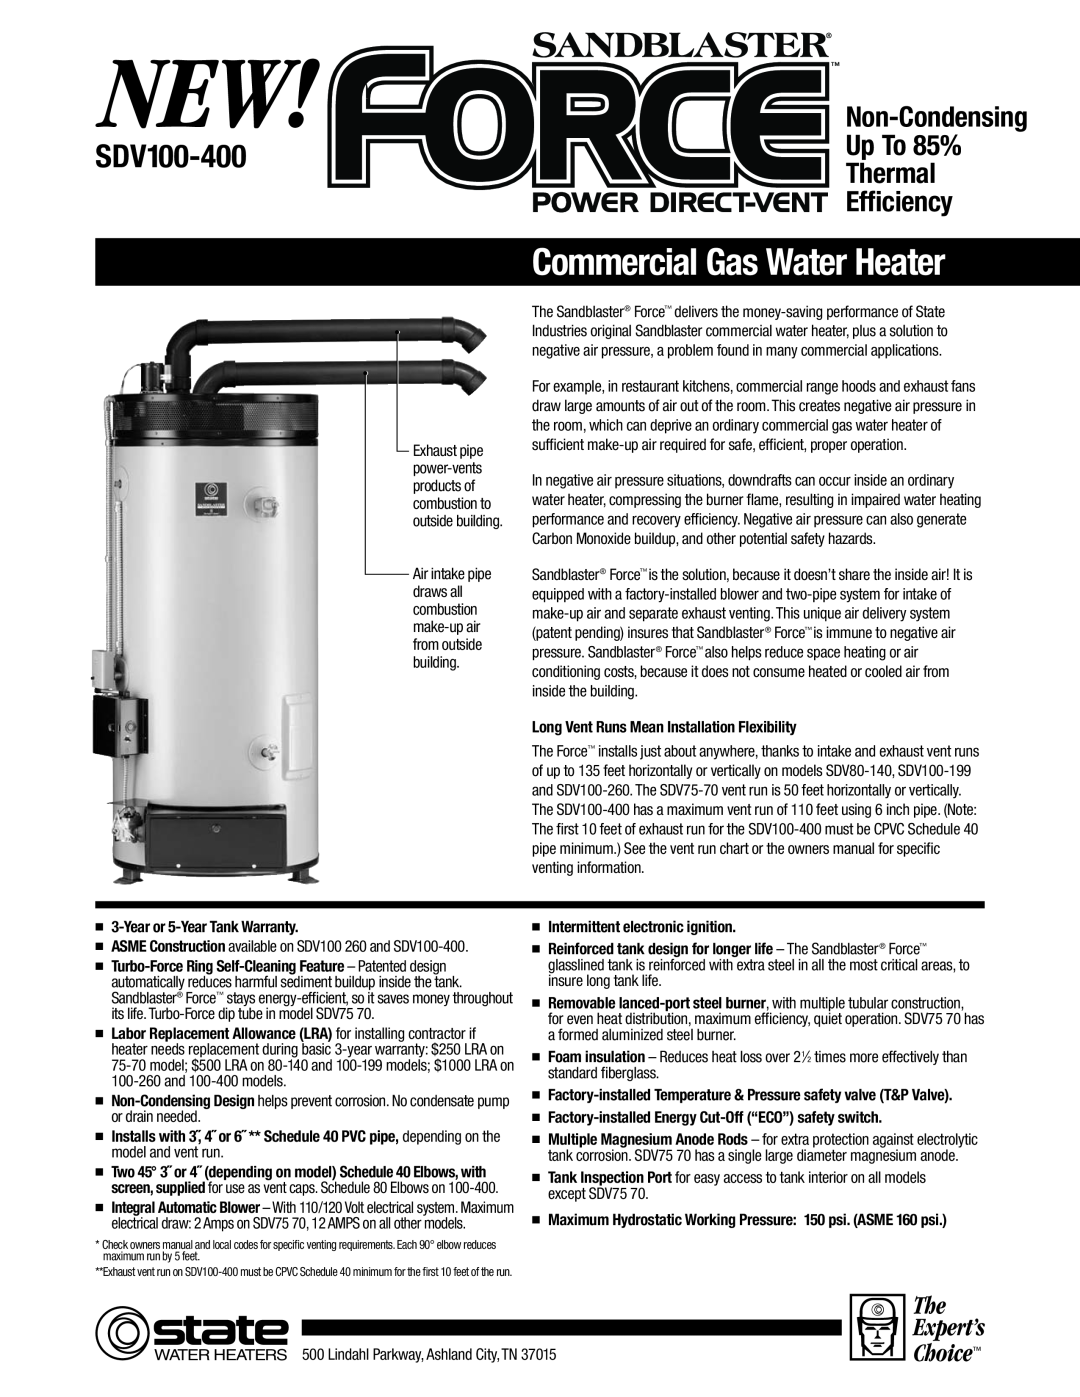 State Industries SDV80-140, SDV100-199, SDV100-260 owner manual Commercial Gas Water Heater, SDV100-400, Expert’s, Choice 